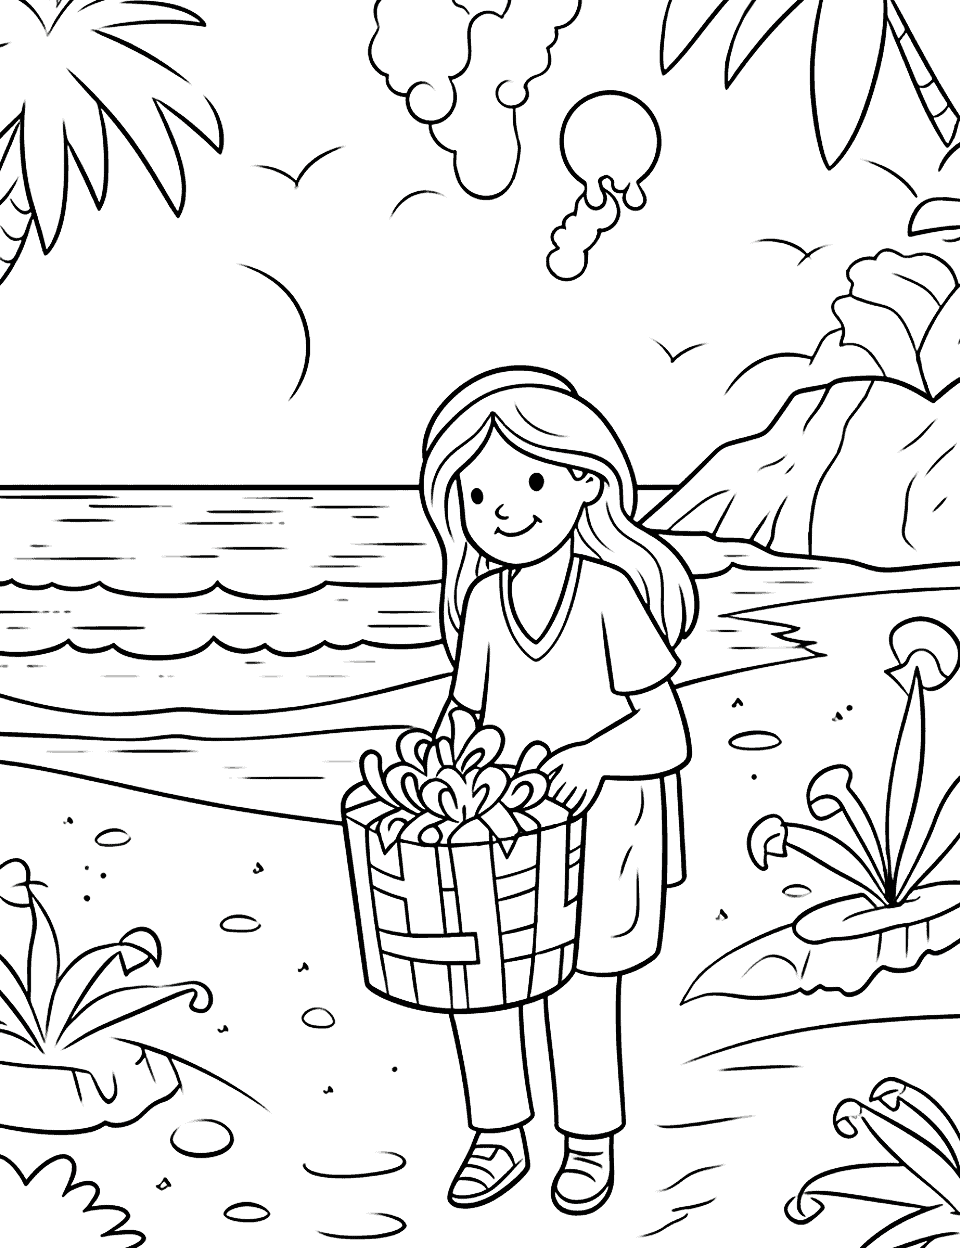 Tropical Birthday Happy Coloring Page - A woman opening a birthday gift on a tropical beach.